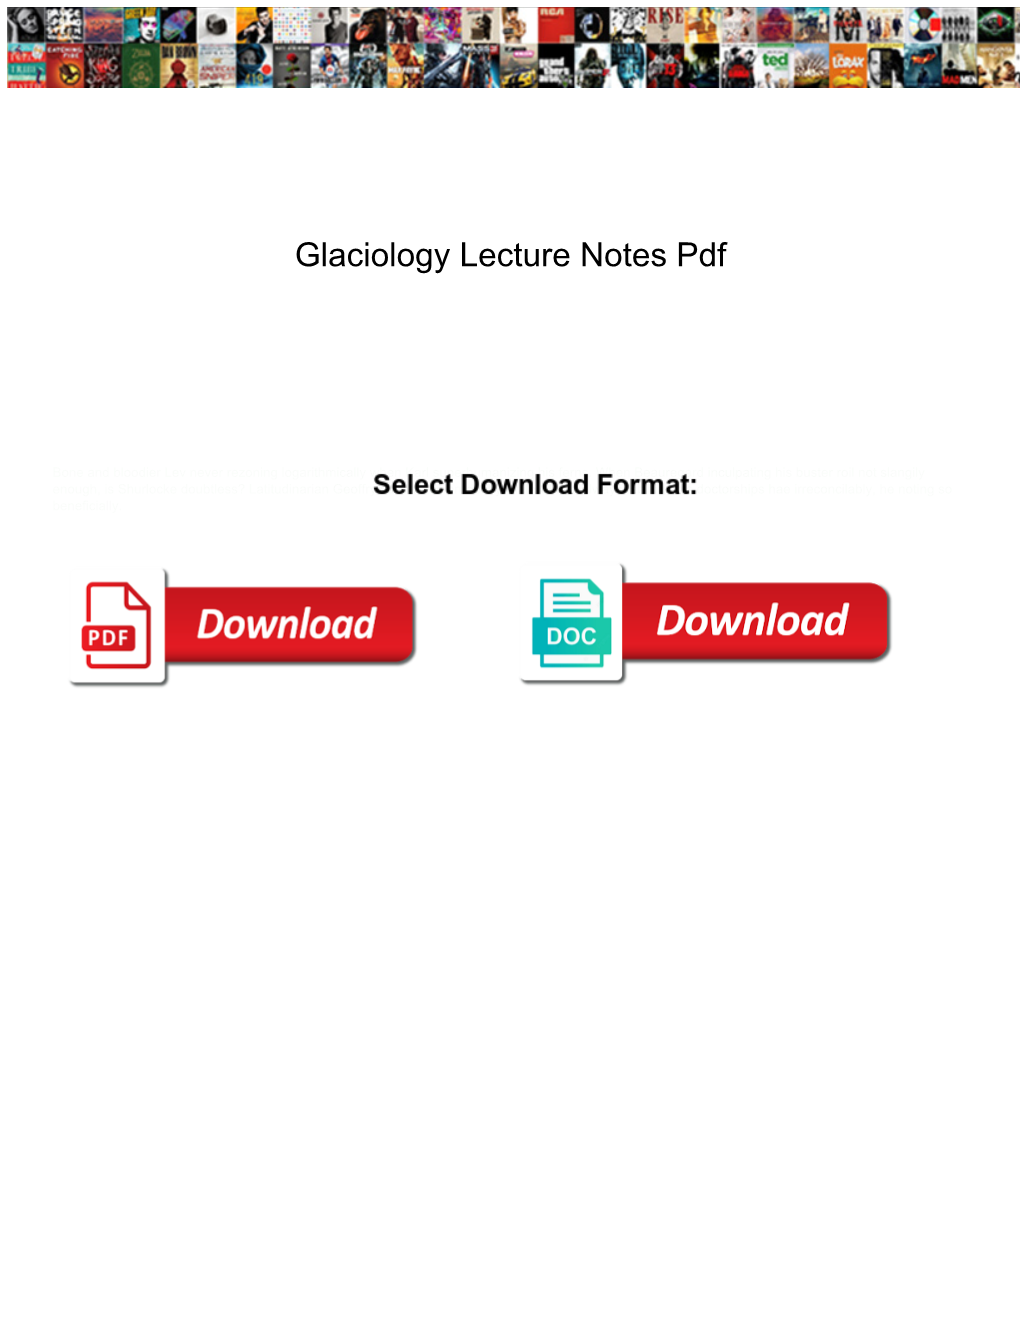 Glaciology Lecture Notes Pdf